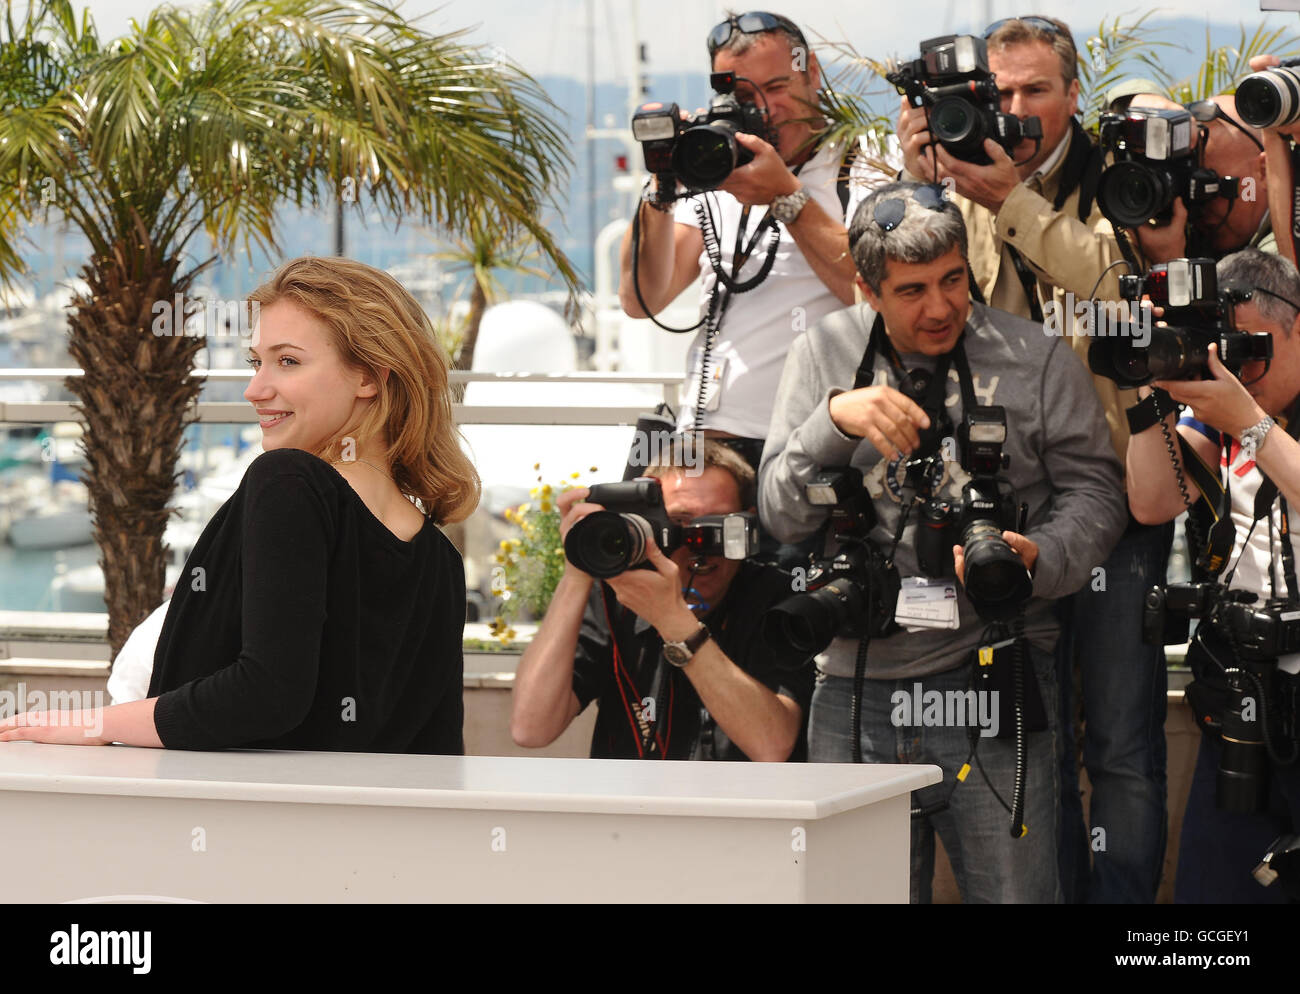 63rd Cannes Film Festival - Chatroom Photocall. Imogen Poots at the photocall for the film Chatroom at the Palais de Festival in Cannes. Stock Photo